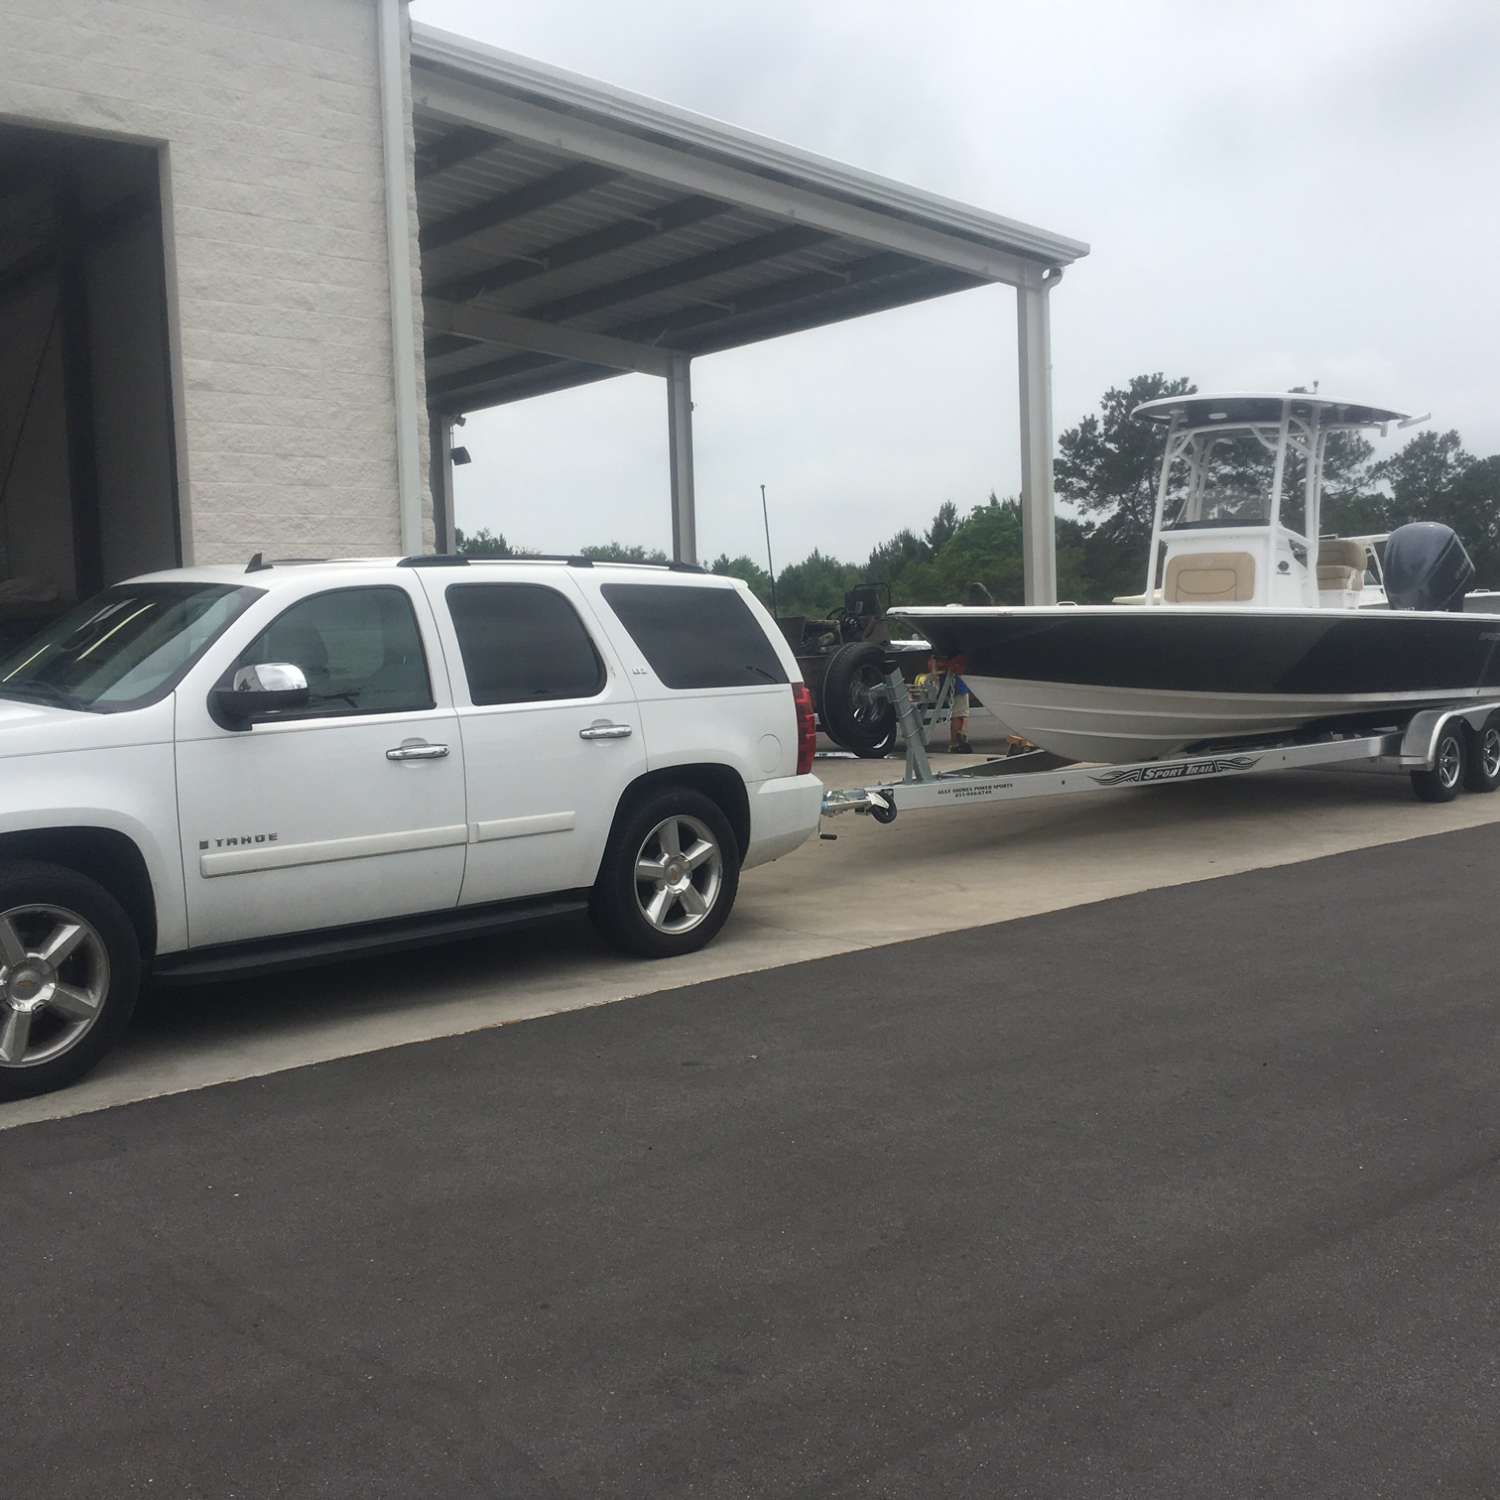 Going home with the new boat.